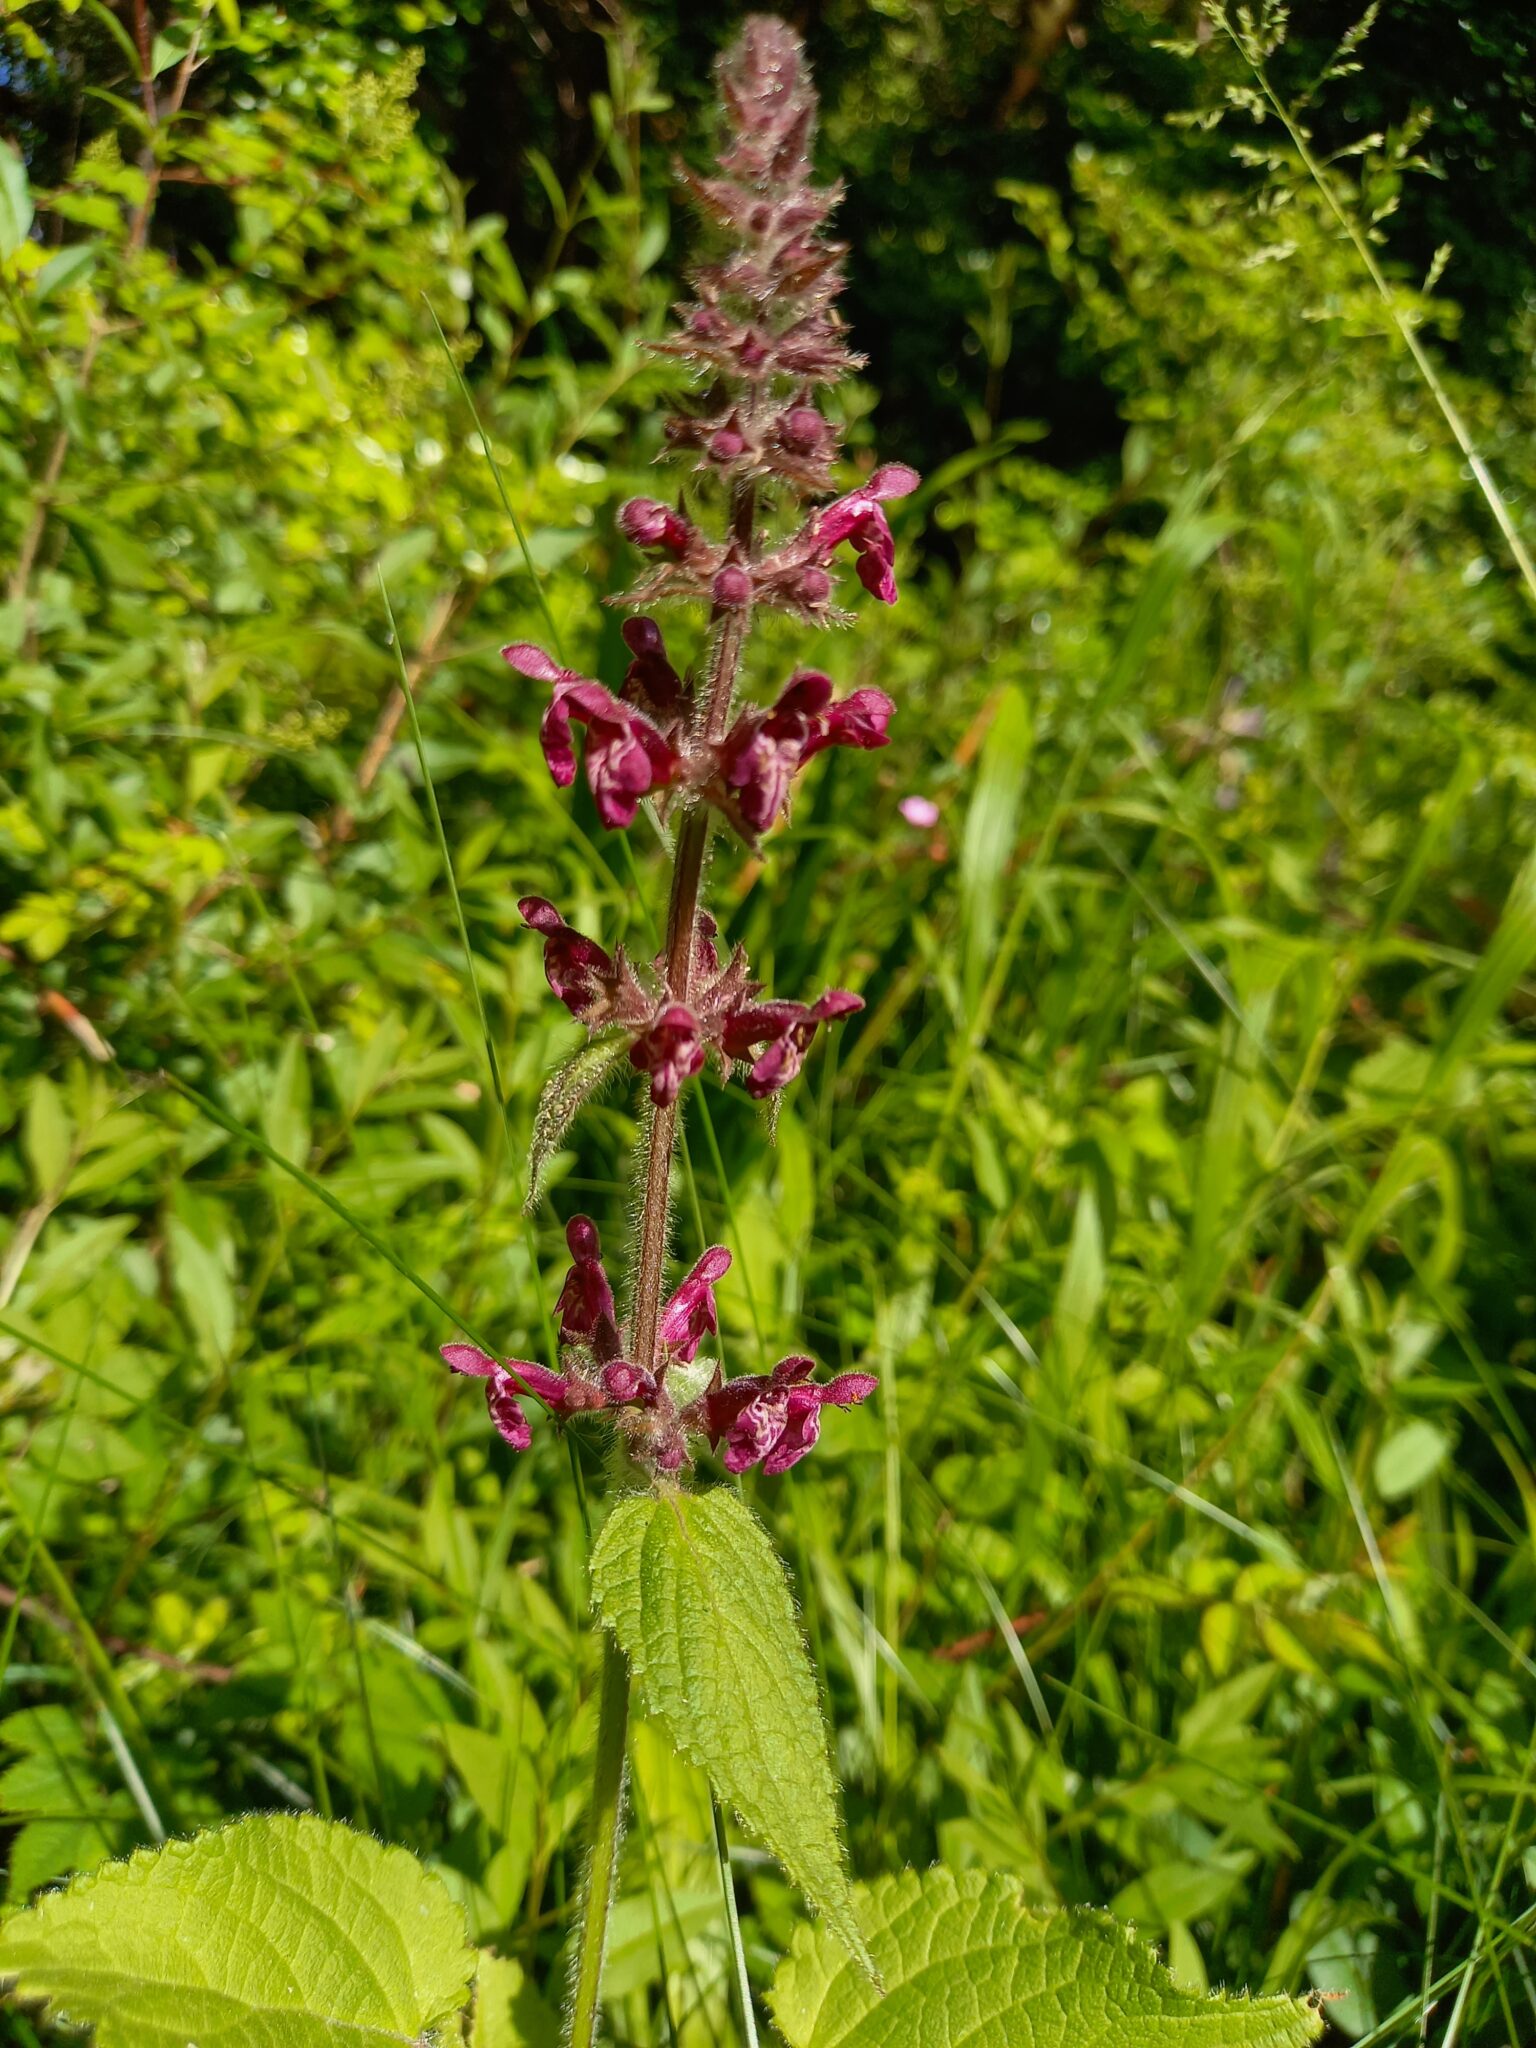 Hedge woundwort - a nettle-like plant with tall burgundy-magenta flowering spikes with widely-spaced whorls of flowers.